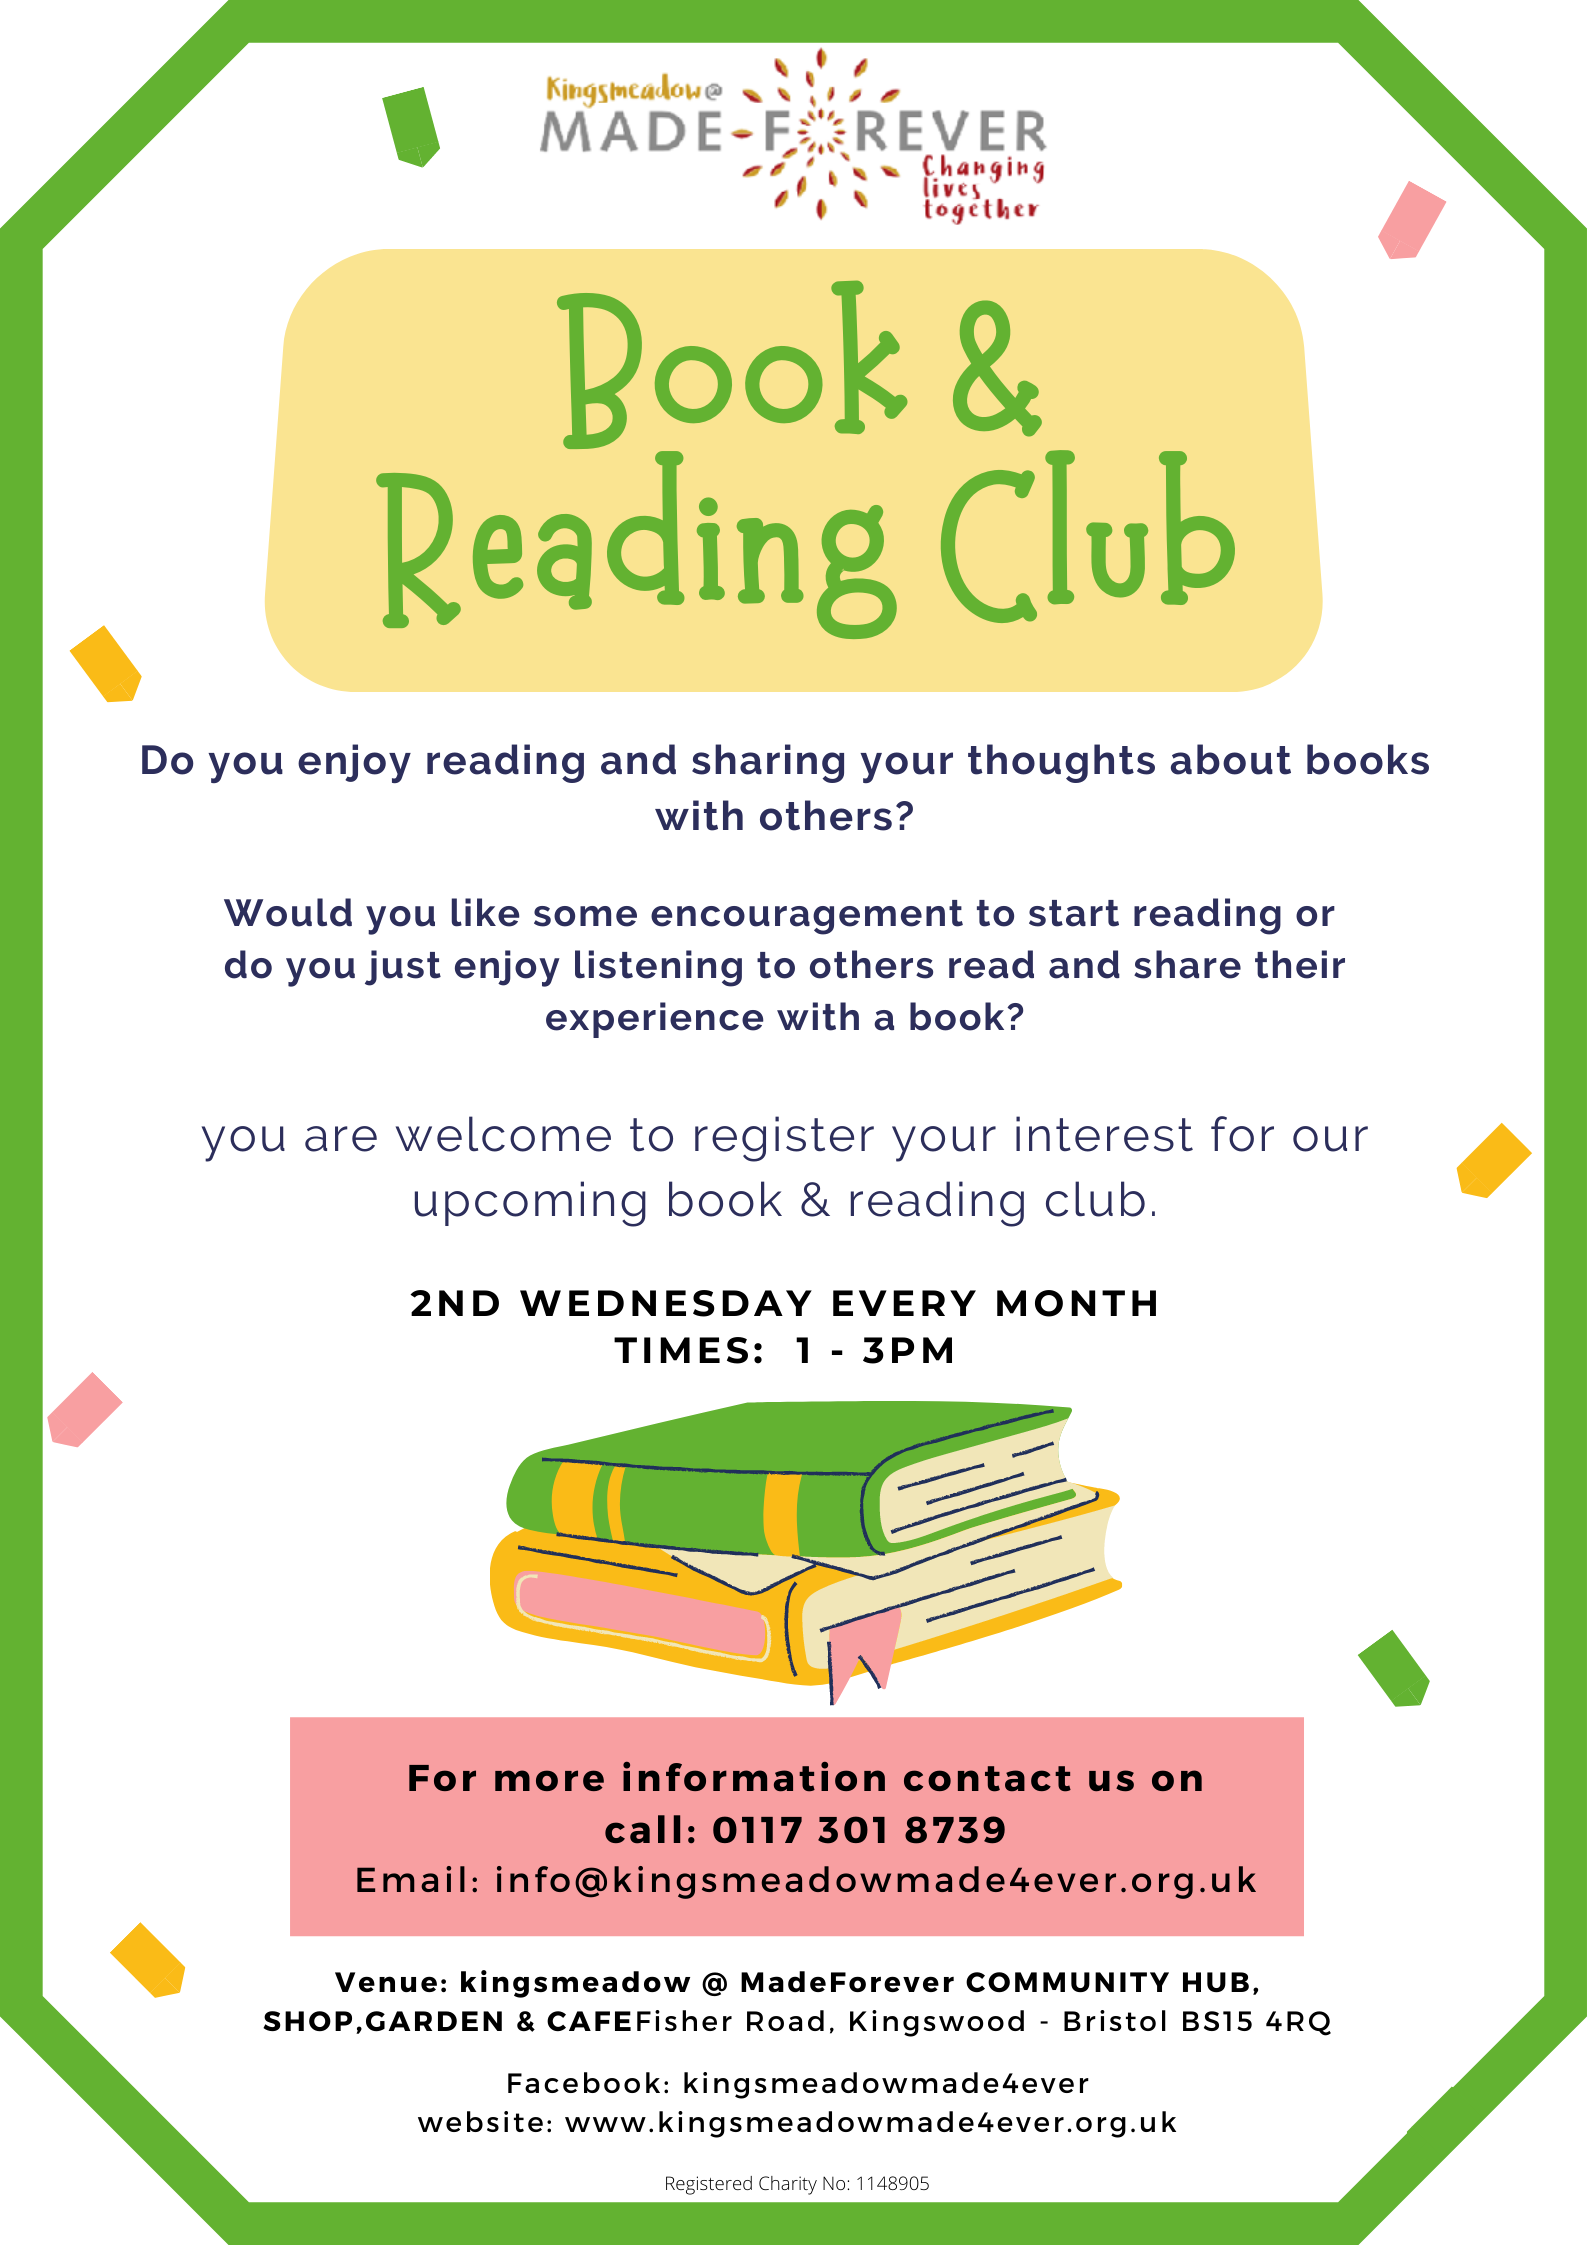 Book and Reading Club – Kingsmeadow@MadeForever